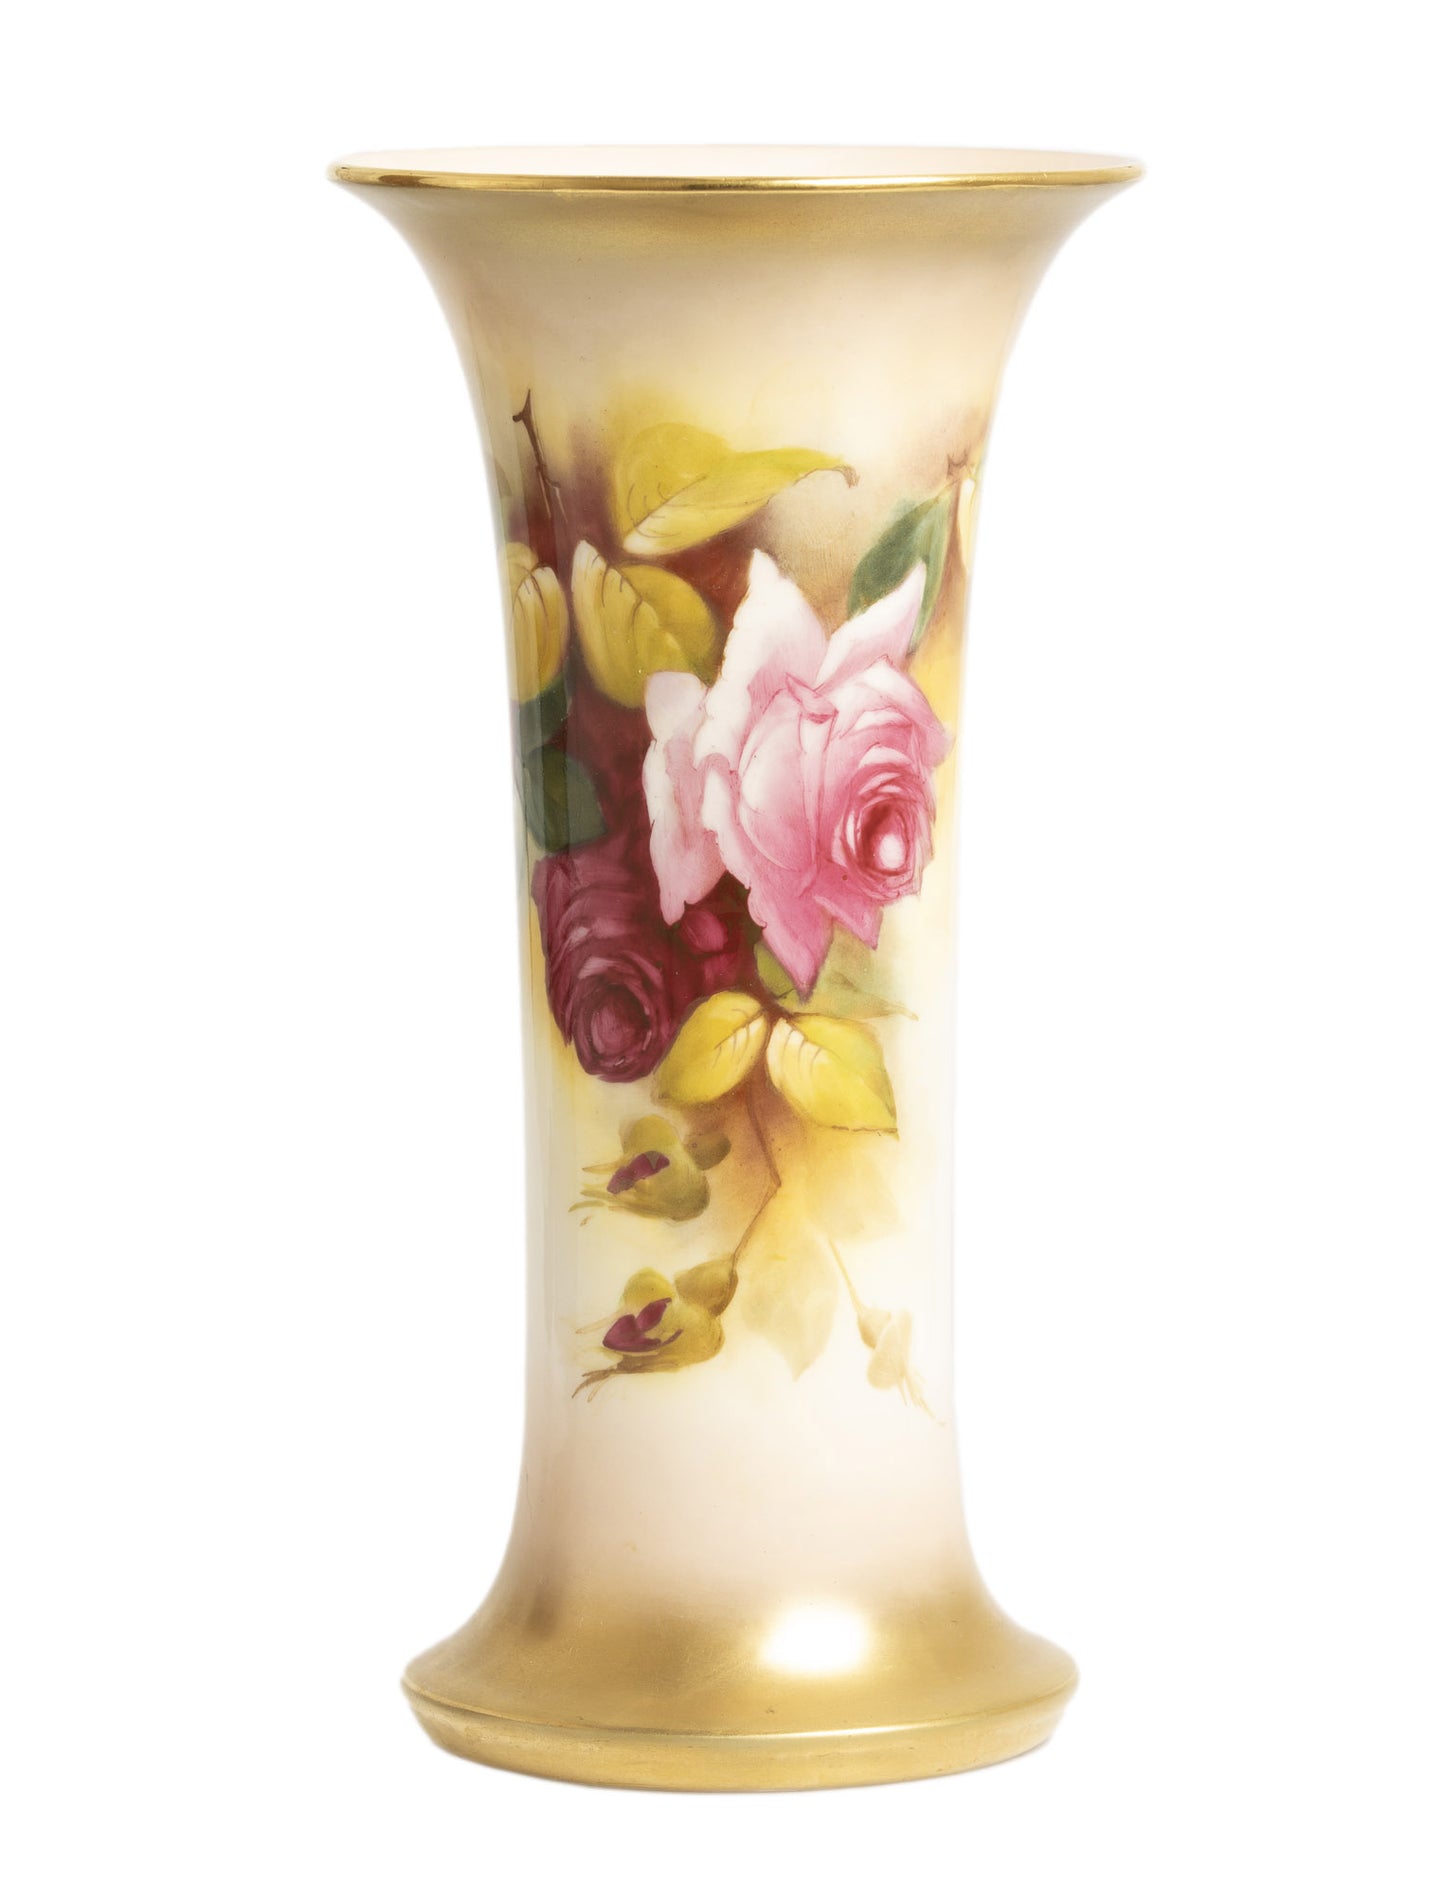 Royal Worcester China Trumpet Vase Hand Painted Roses by Ethel Spilsbury Dated 1930 (3048)